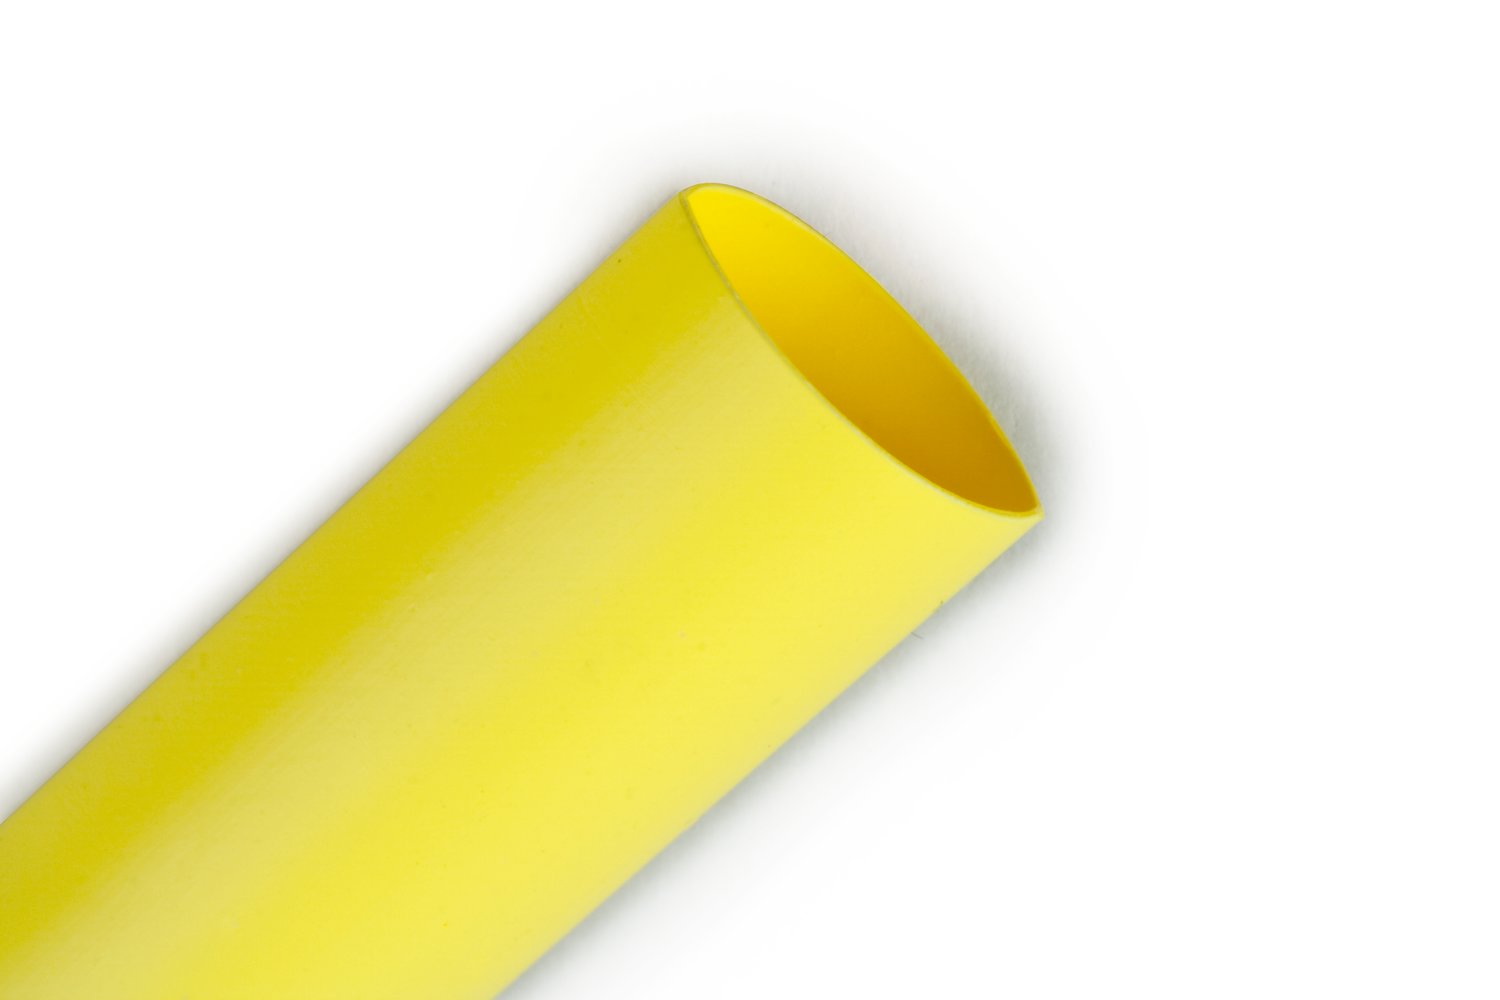 7000058002 - 3M Heat Shrink Thin-Wall Tubing FP-301-4-Yellow-50', 50 ft Length, 1524
Meter/Case